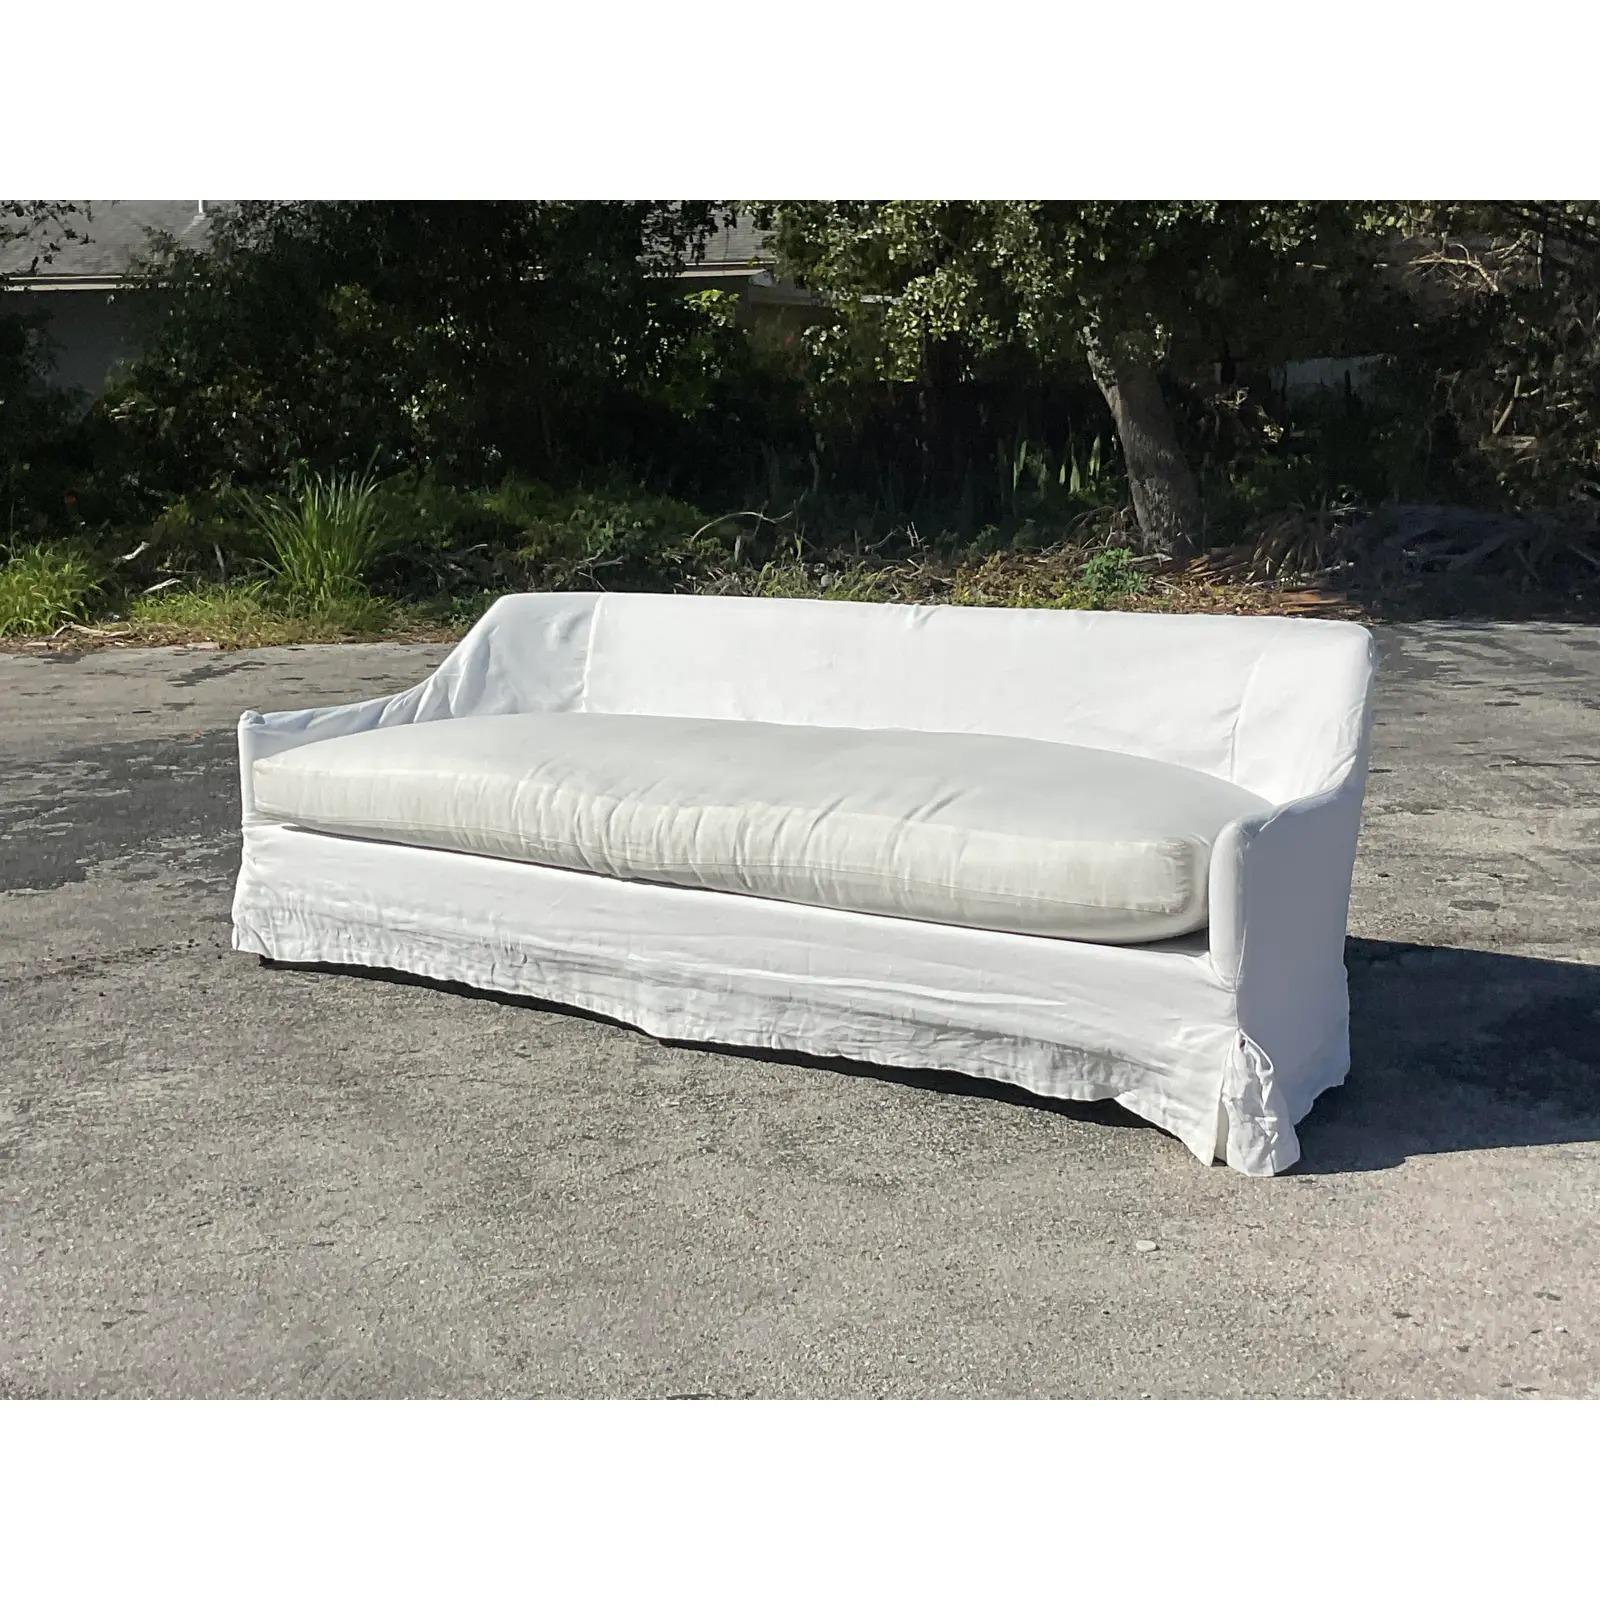 A fantastic vintage Boho sofa. Made by the legendary George Smith. A chic grey LeJuene upholstery with subtle shade variations with the cushion and sofa. The sofa also includes a full white linen slipcover. Acquired from a Palm Beach estate.